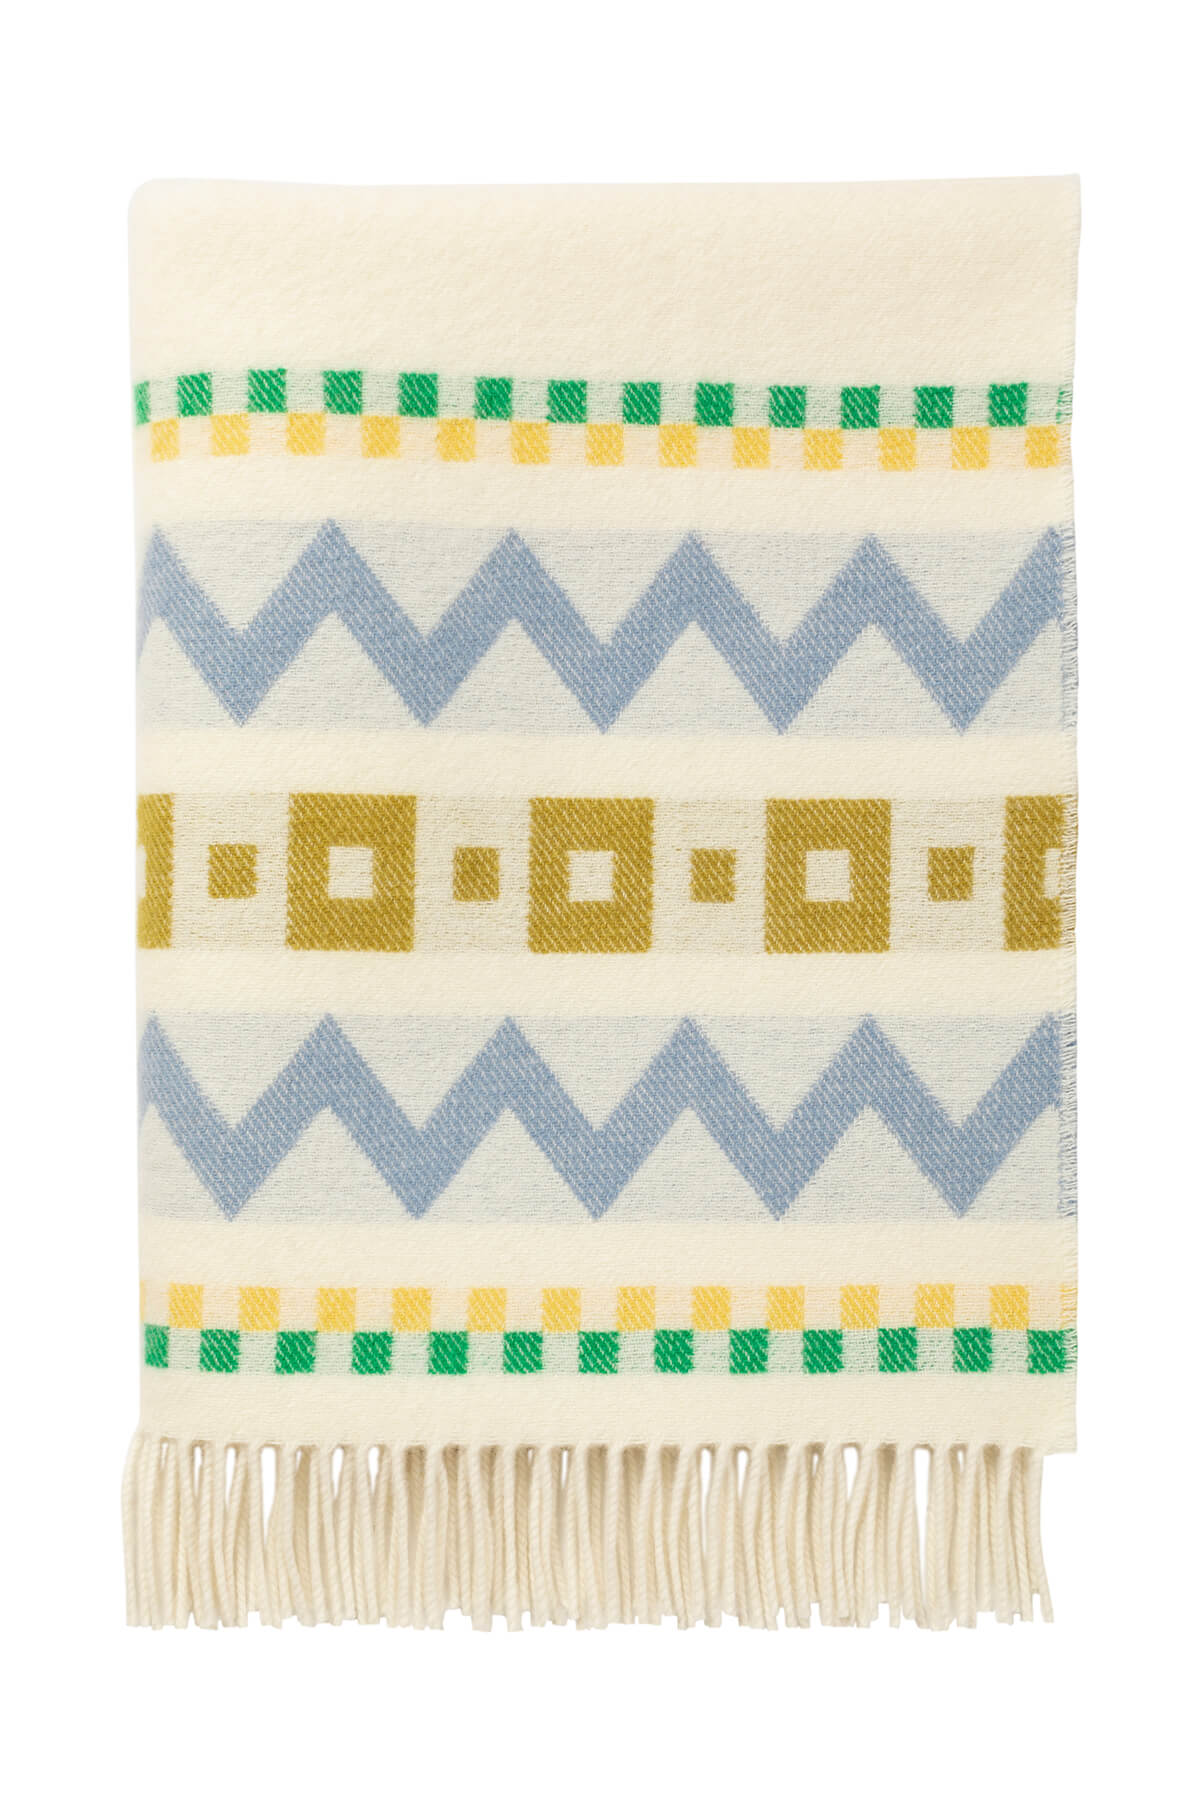 Folded Johnstons of Elgin Children's Zig Zag Blanket in shades of blue, green, and cream on white background WB002334RU7276ONE